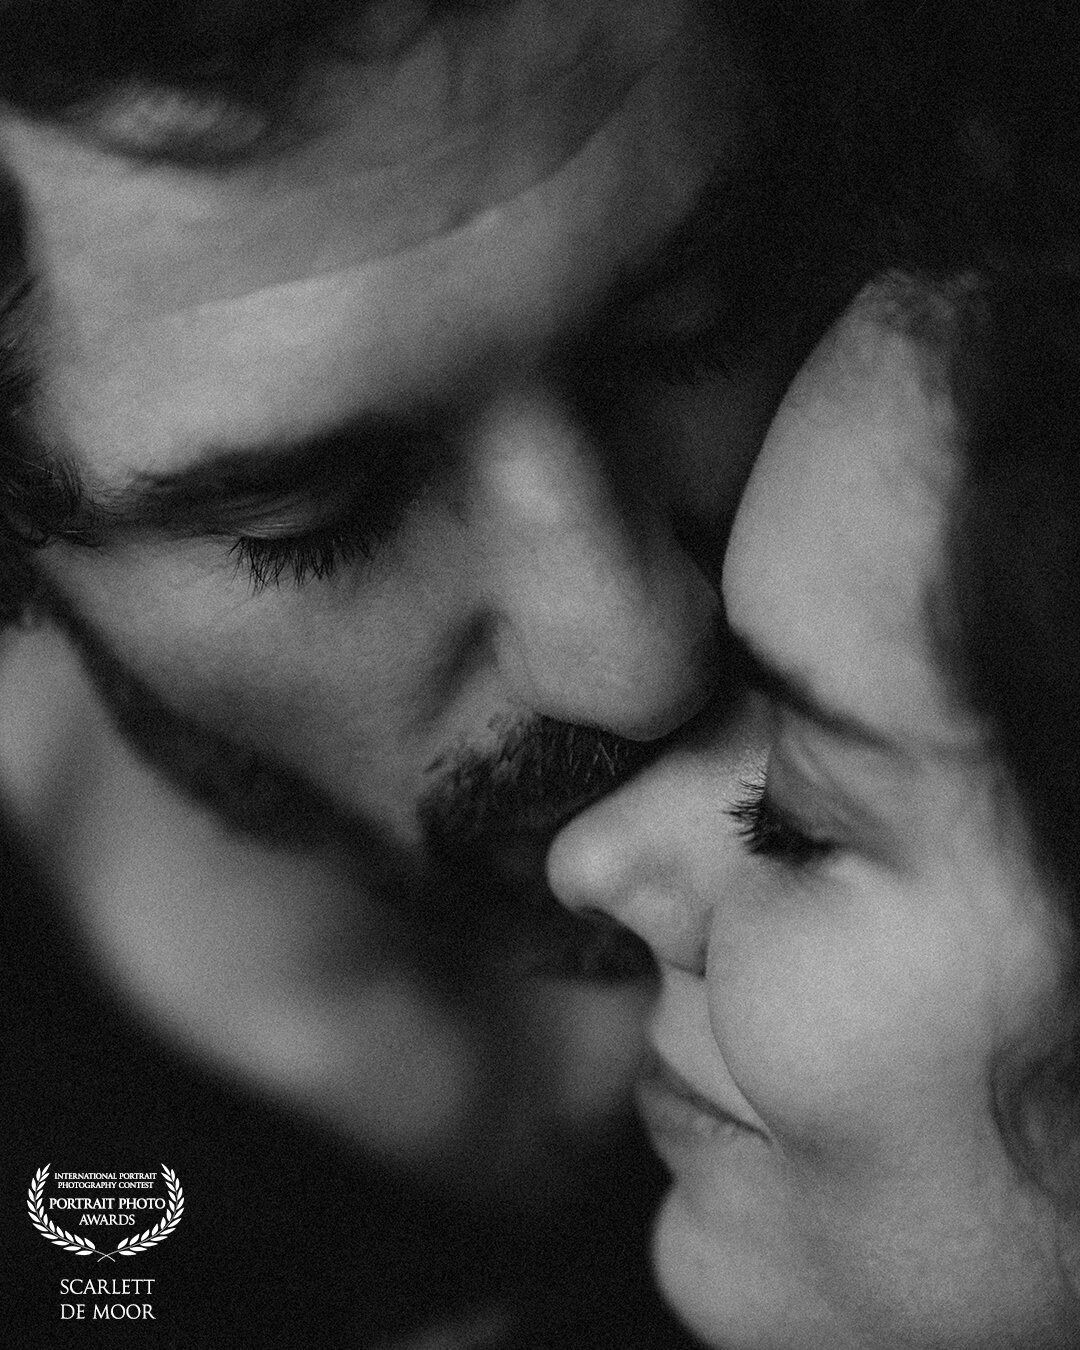 As a cinematic photographer I want to capture moments between lovers in a cinematic way. Like a still from a movie. Up close and personal. That's what you feel in this picture and that's why I love it.